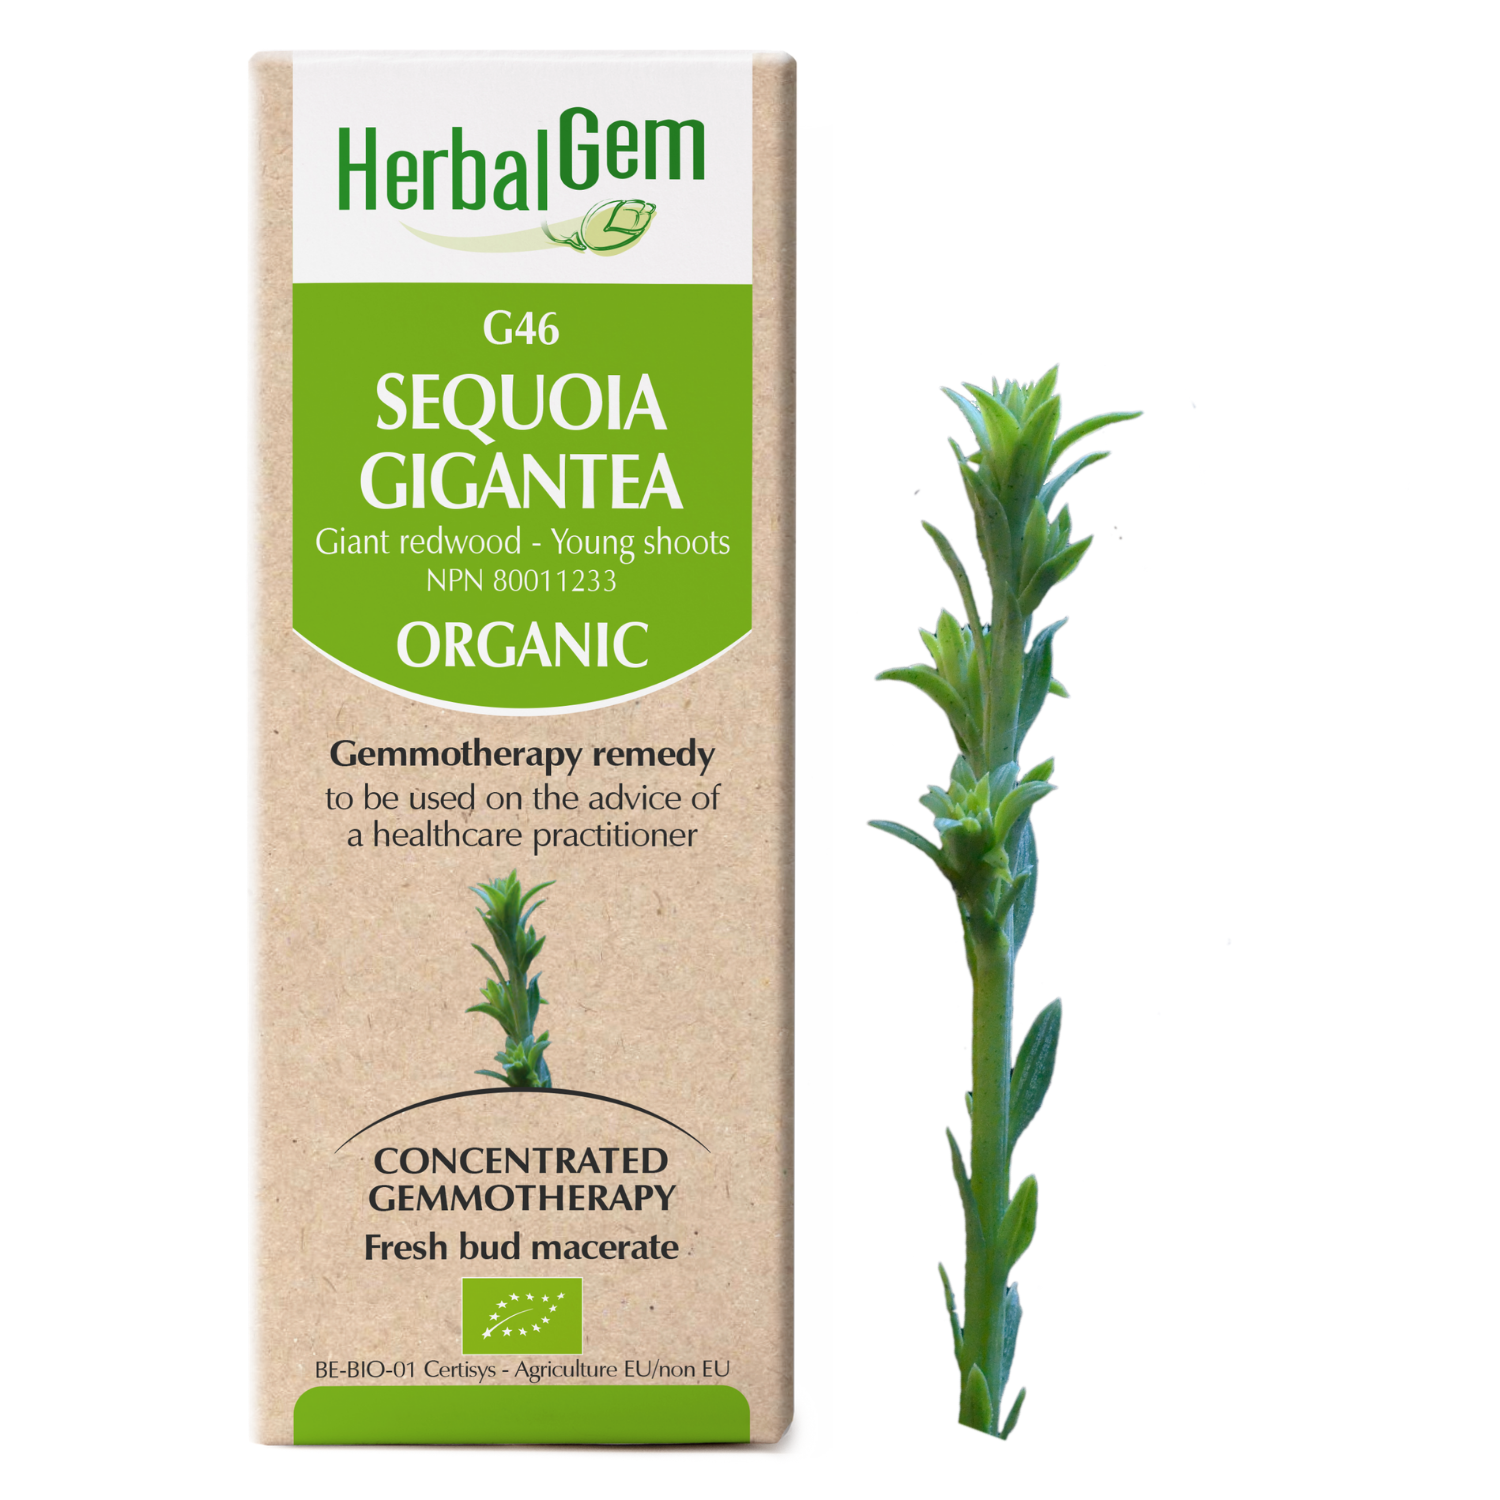 G46 Sequoia gigantea Gemmotherapy remedy Organic Giant redwood Young shoots